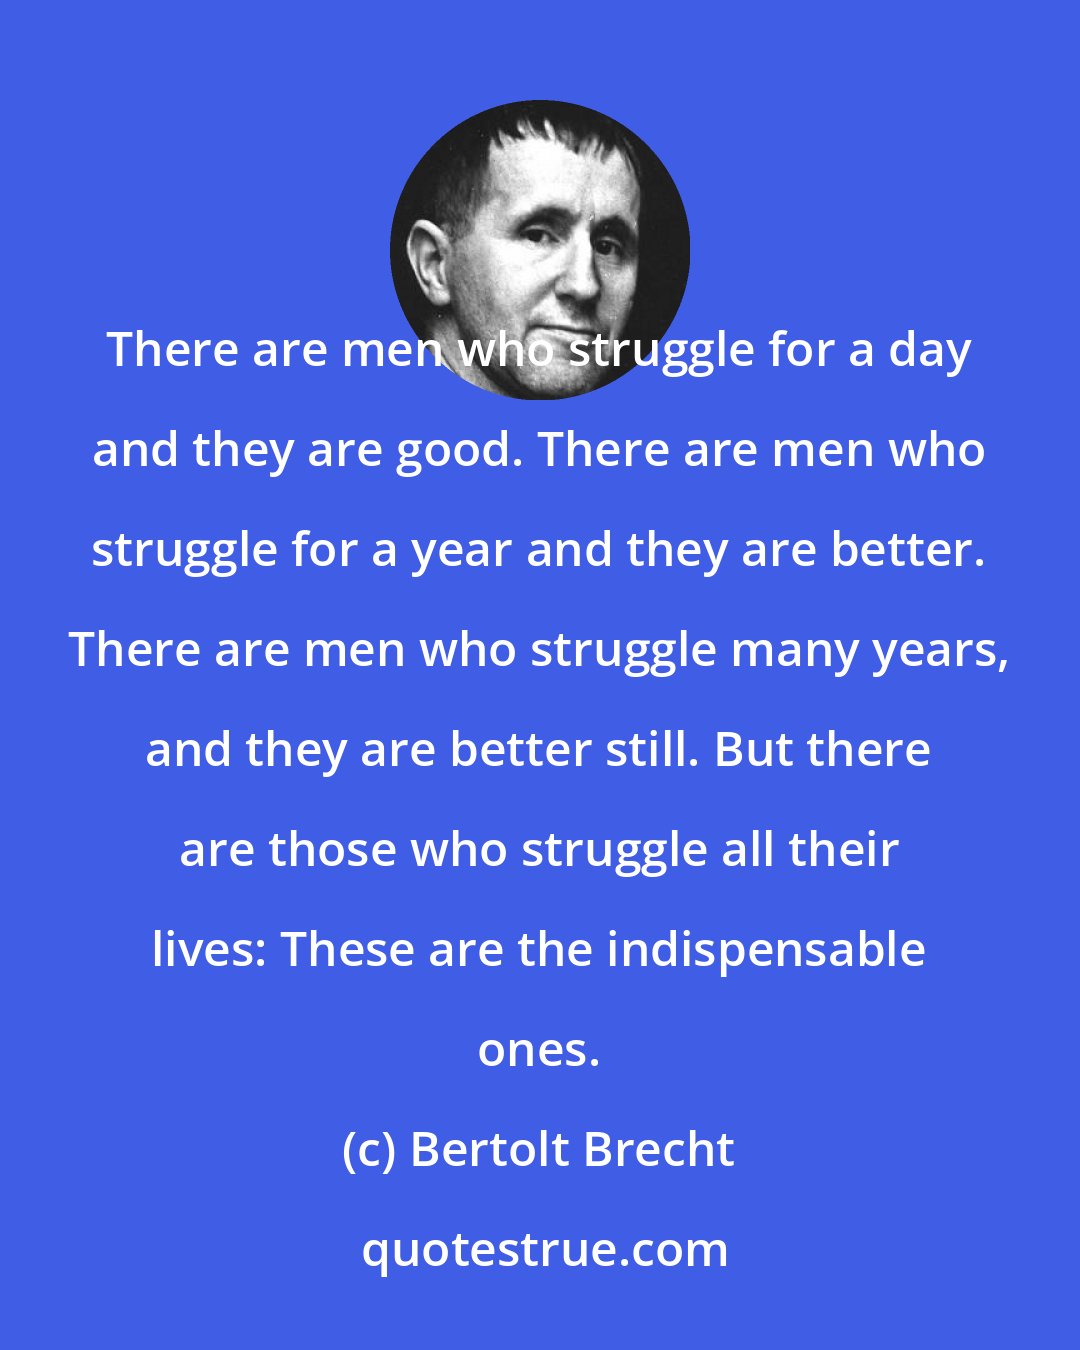 Bertolt Brecht: There are men who struggle for a day and they are good. There are men who struggle for a year and they are better. There are men who struggle many years, and they are better still. But there are those who struggle all their lives: These are the indispensable ones.